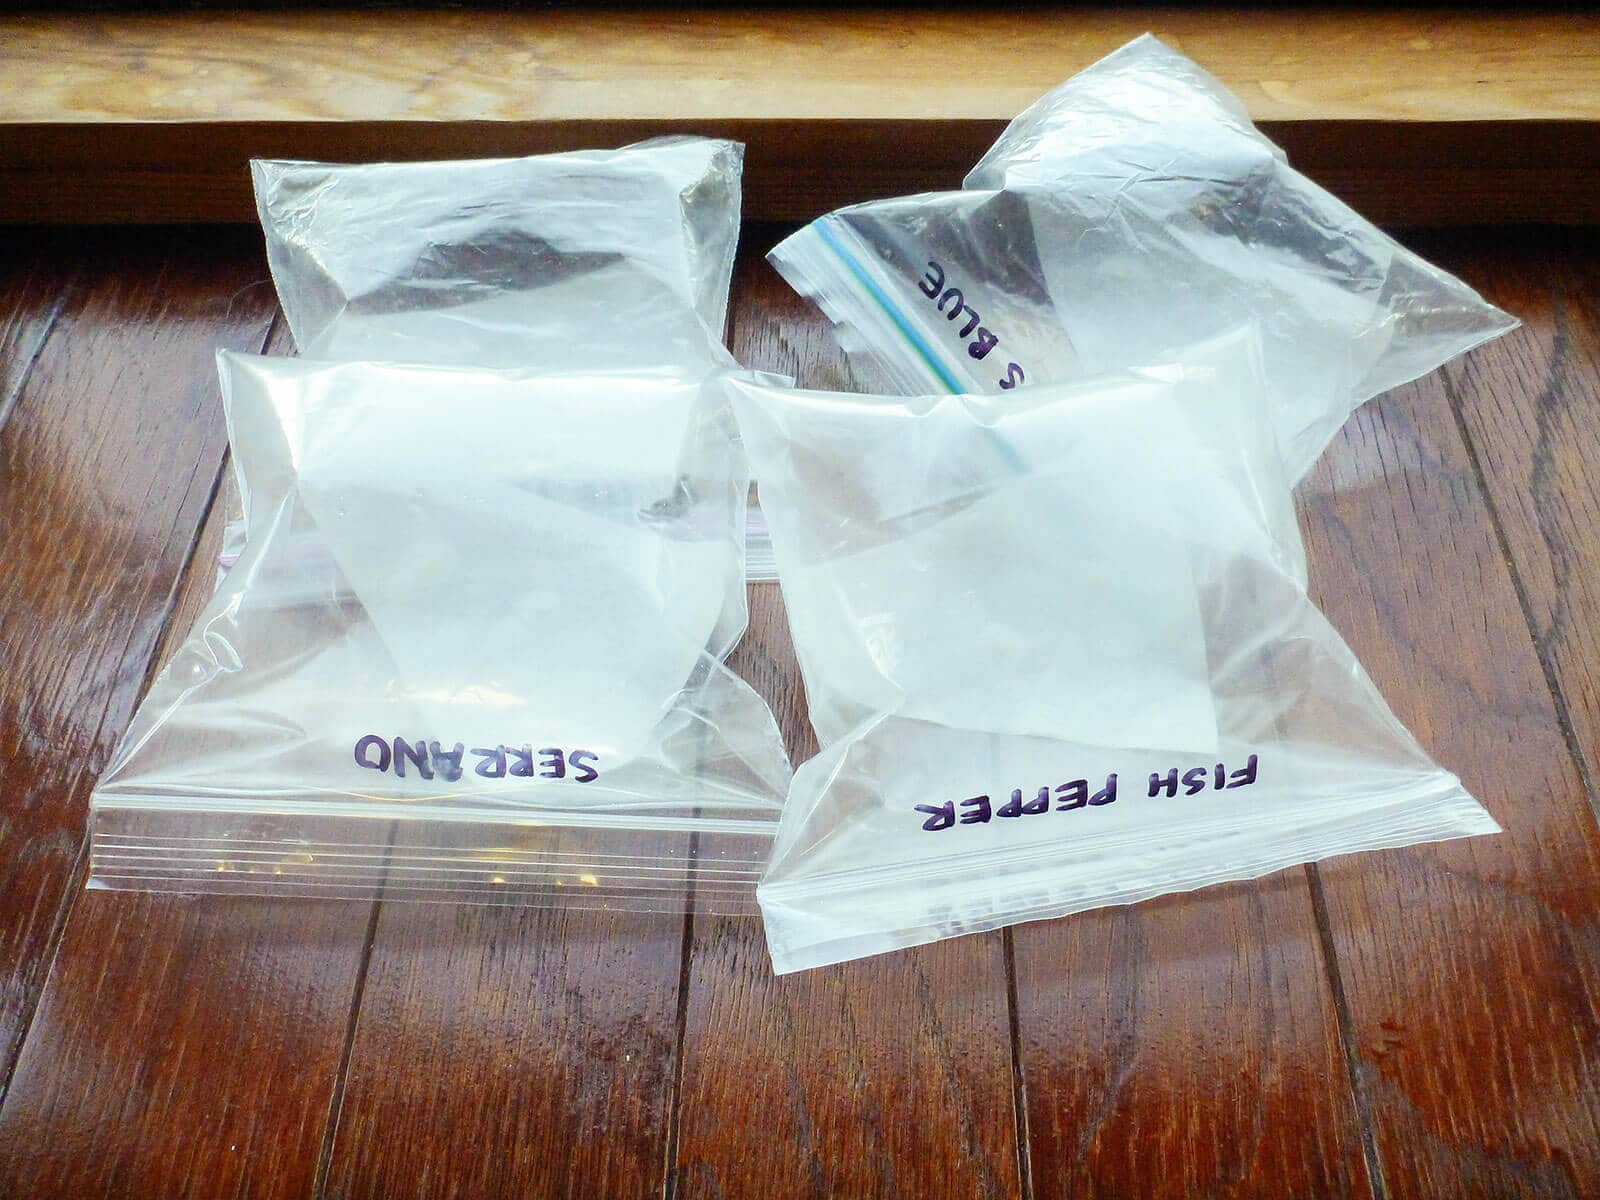 The baggie method for testing seed germination